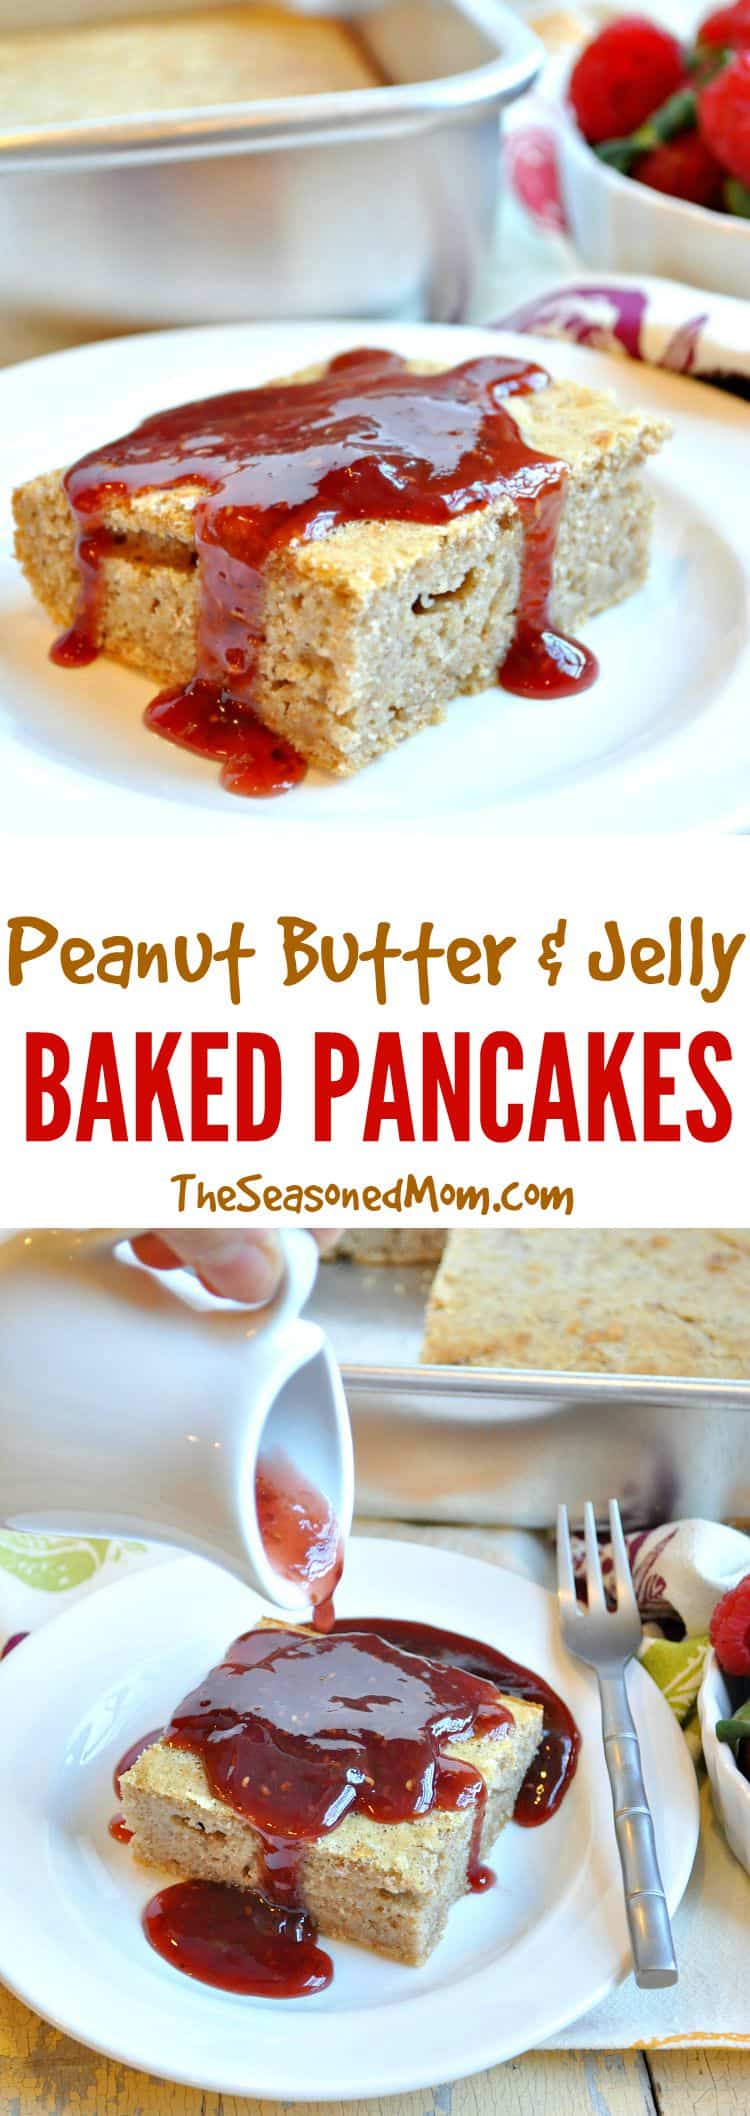 Peanut Butter and Jelly Baked Pancakes - The Seasoned Mom